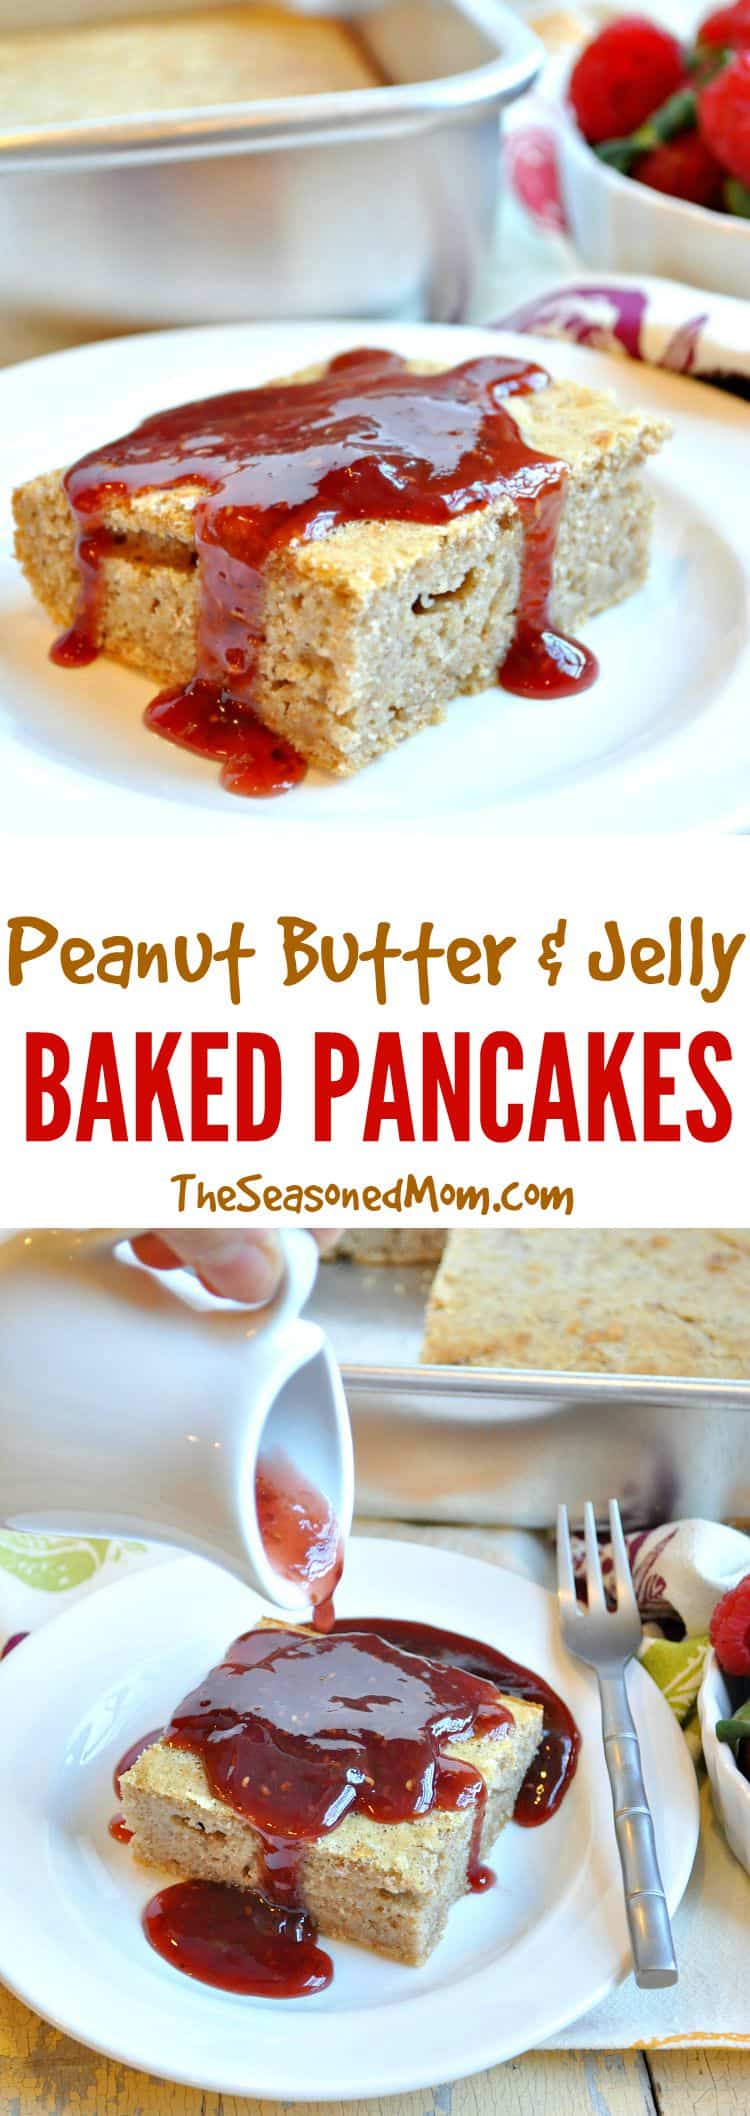 Peanut Butter and Jelly Baked Pancakes - The Seasoned Mom